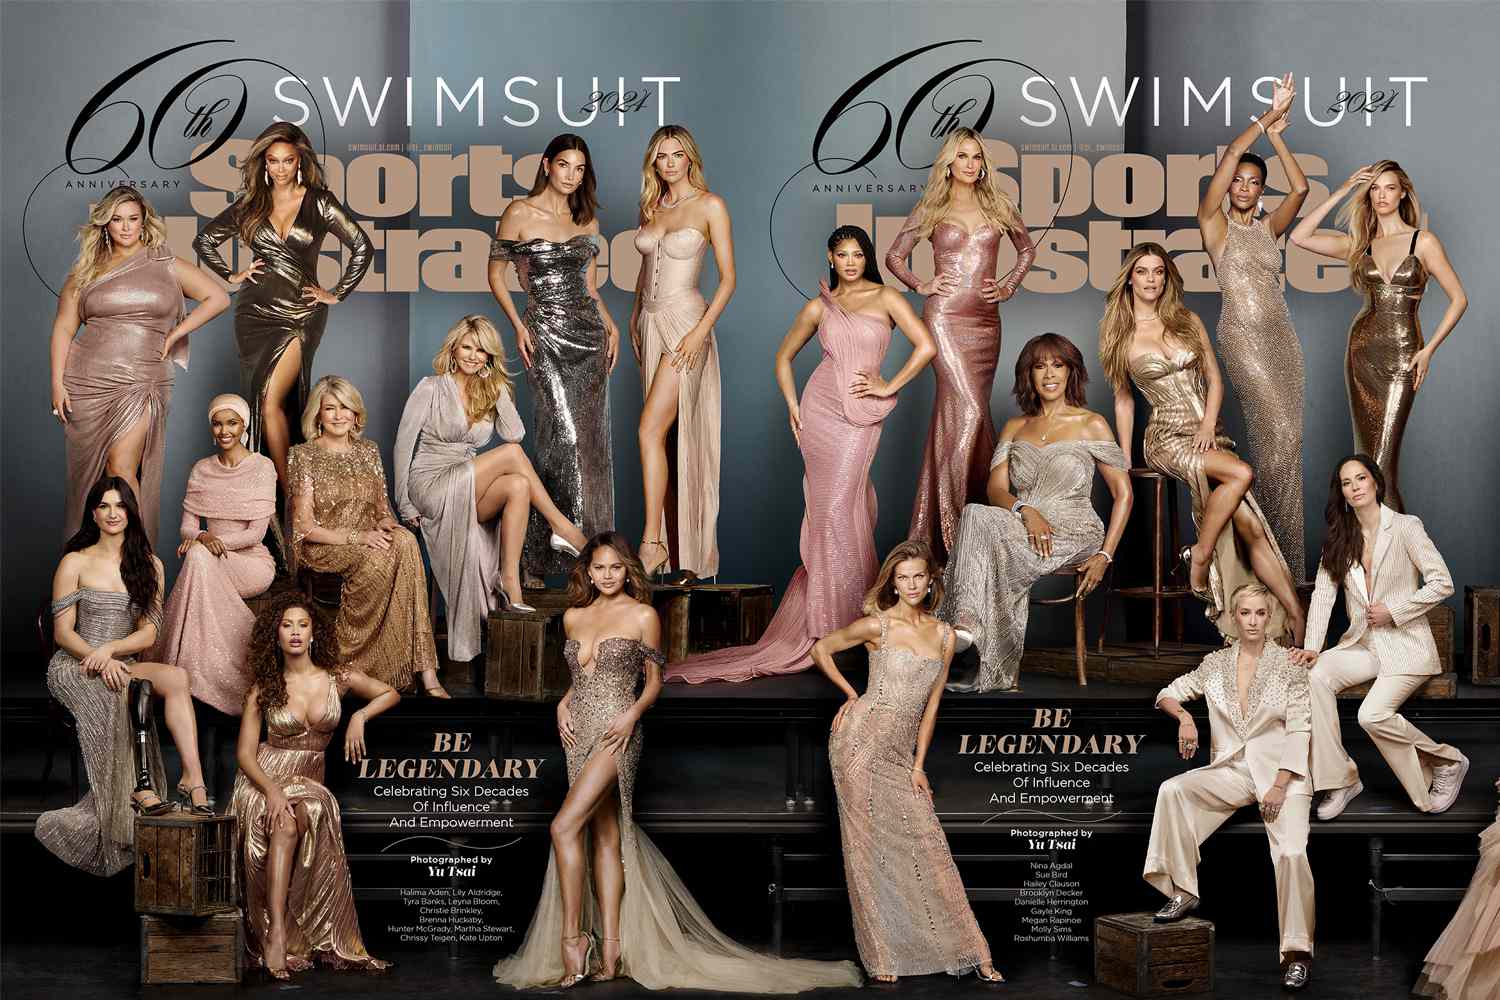 “SI Swimsuit” Celebrates 60th Anniversary with Iconic Legends Covers Starring Martha Stewart, Tyra Banks and More